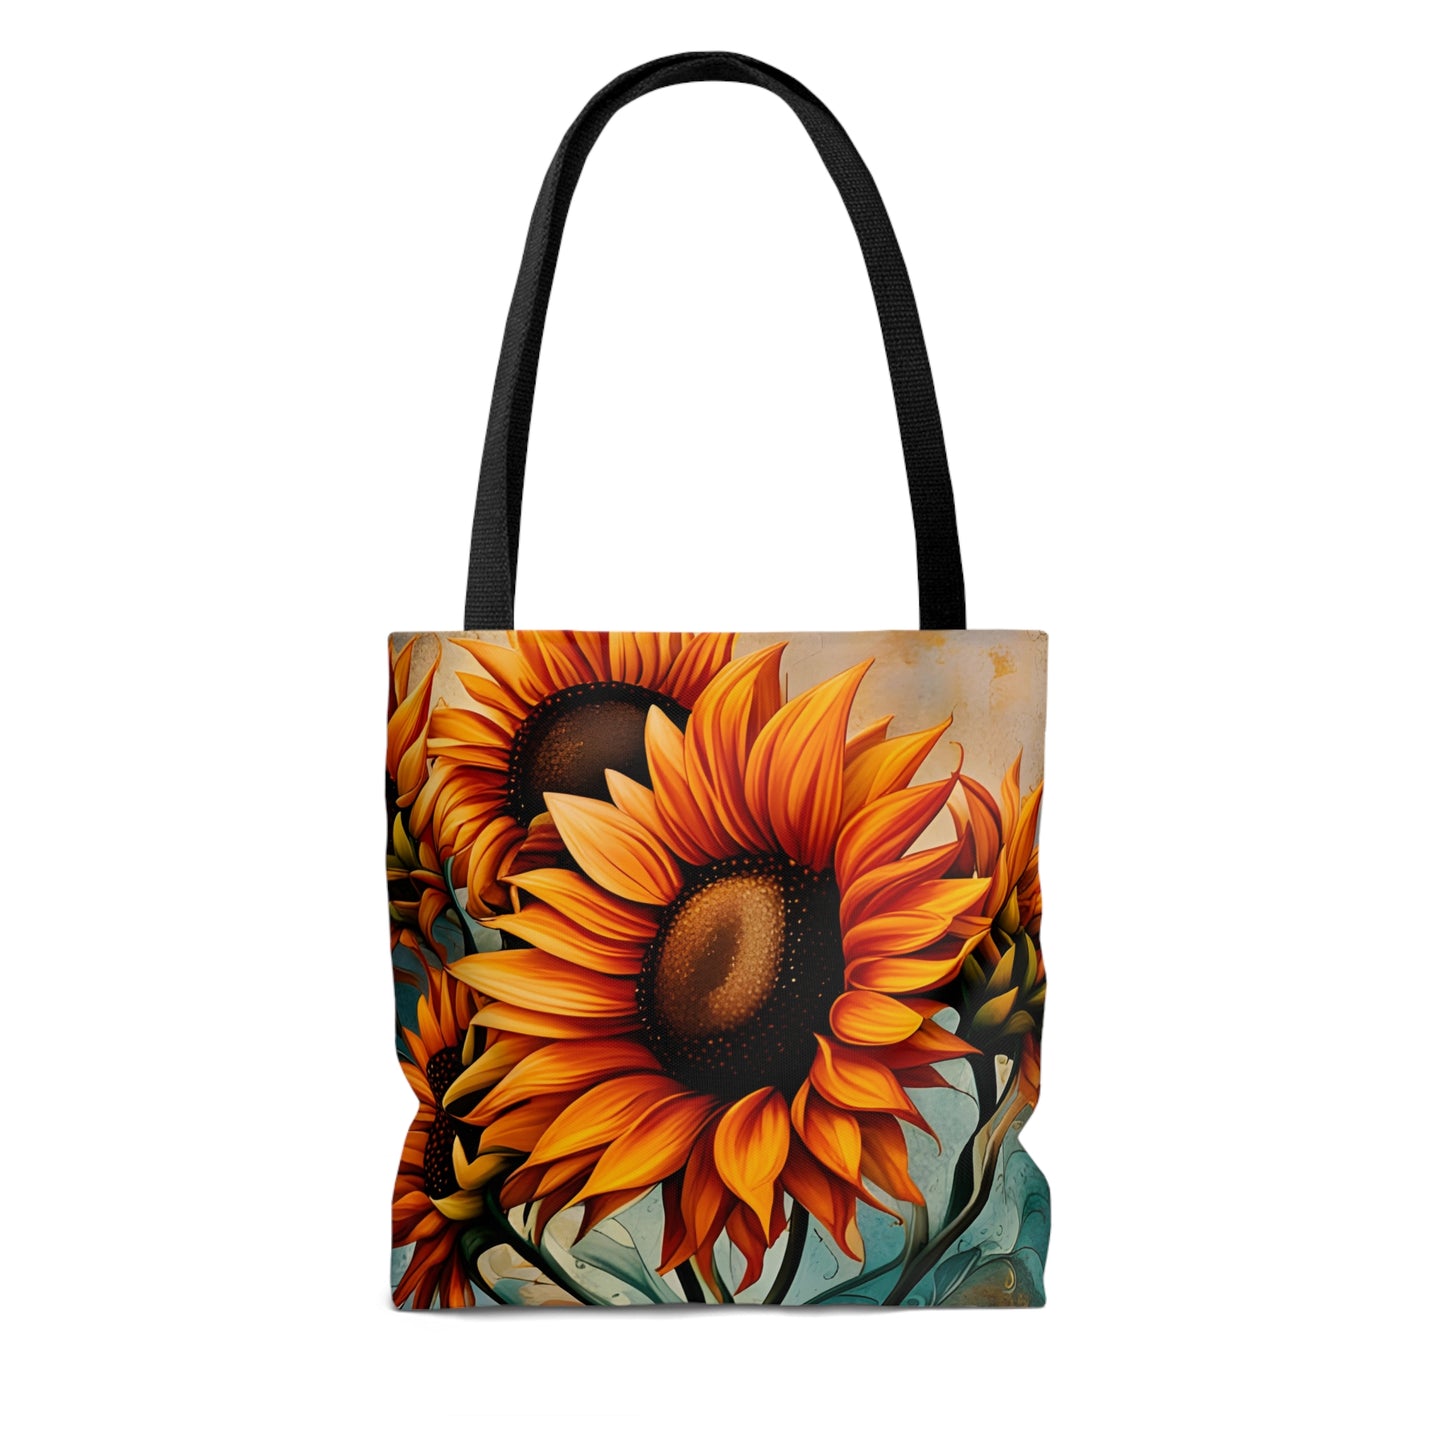 Sunflower Crop on Distressed Blue and Copper Background Printed on Tote Bag Back